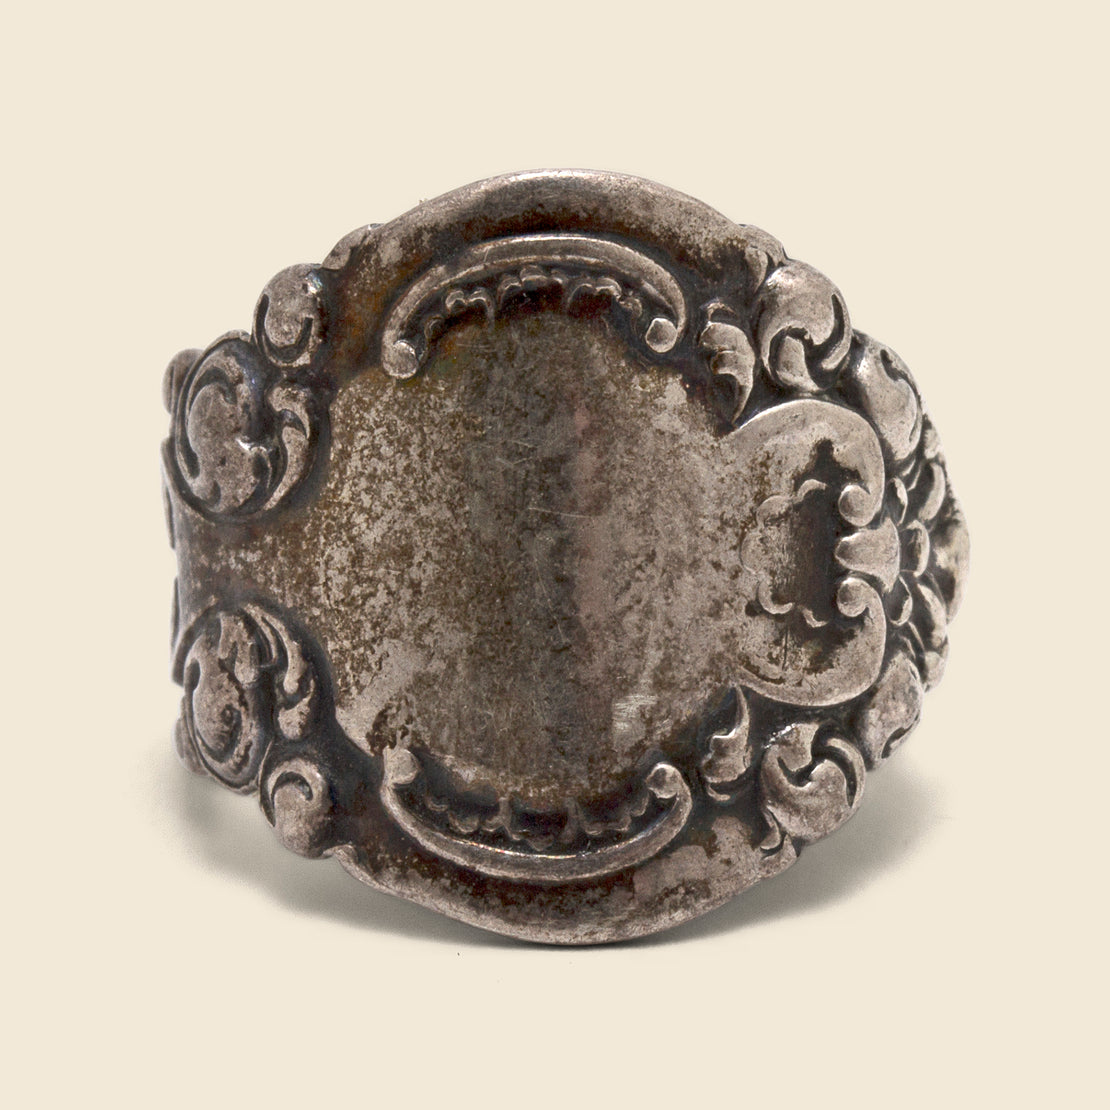 Ornate Spoon Ring - Silver